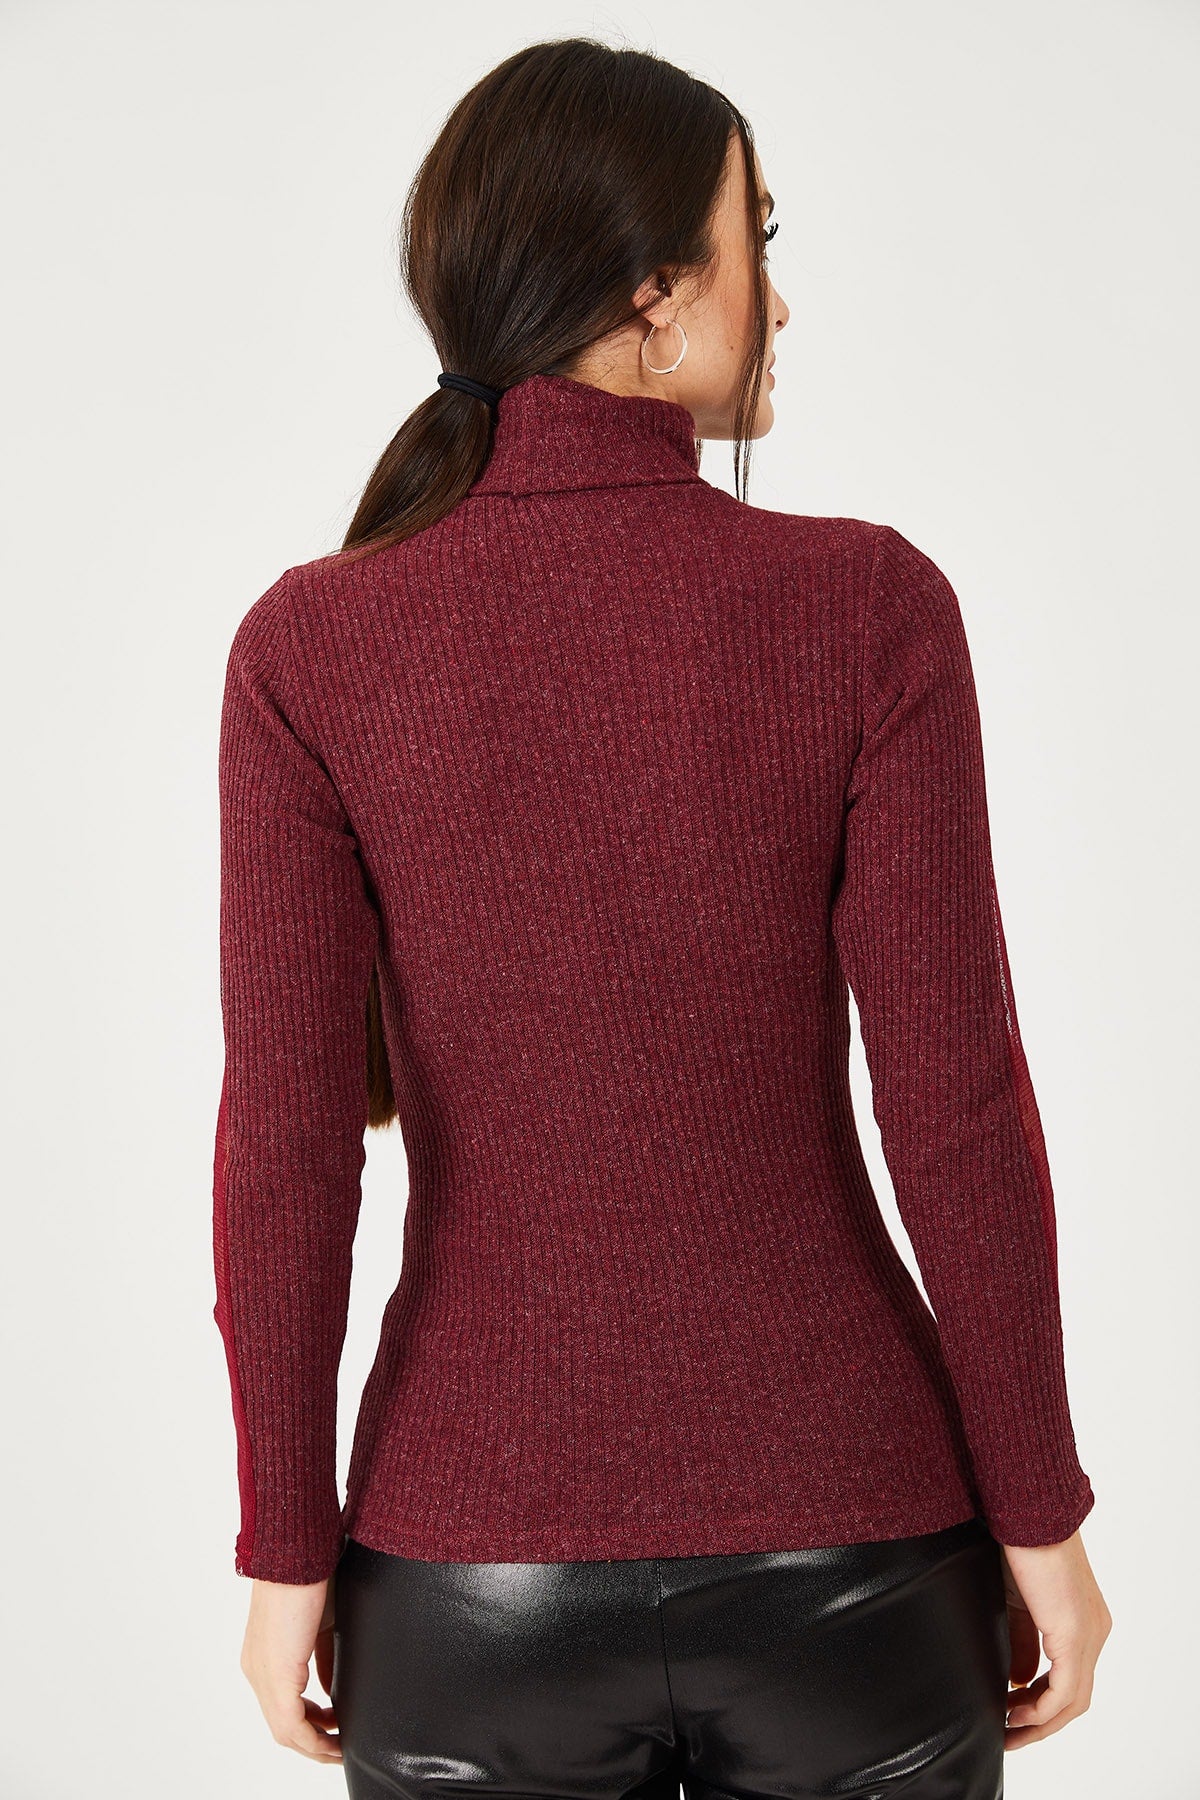 Female burgundy neck lever lace detailed knitwear sweater ARM-21K001056